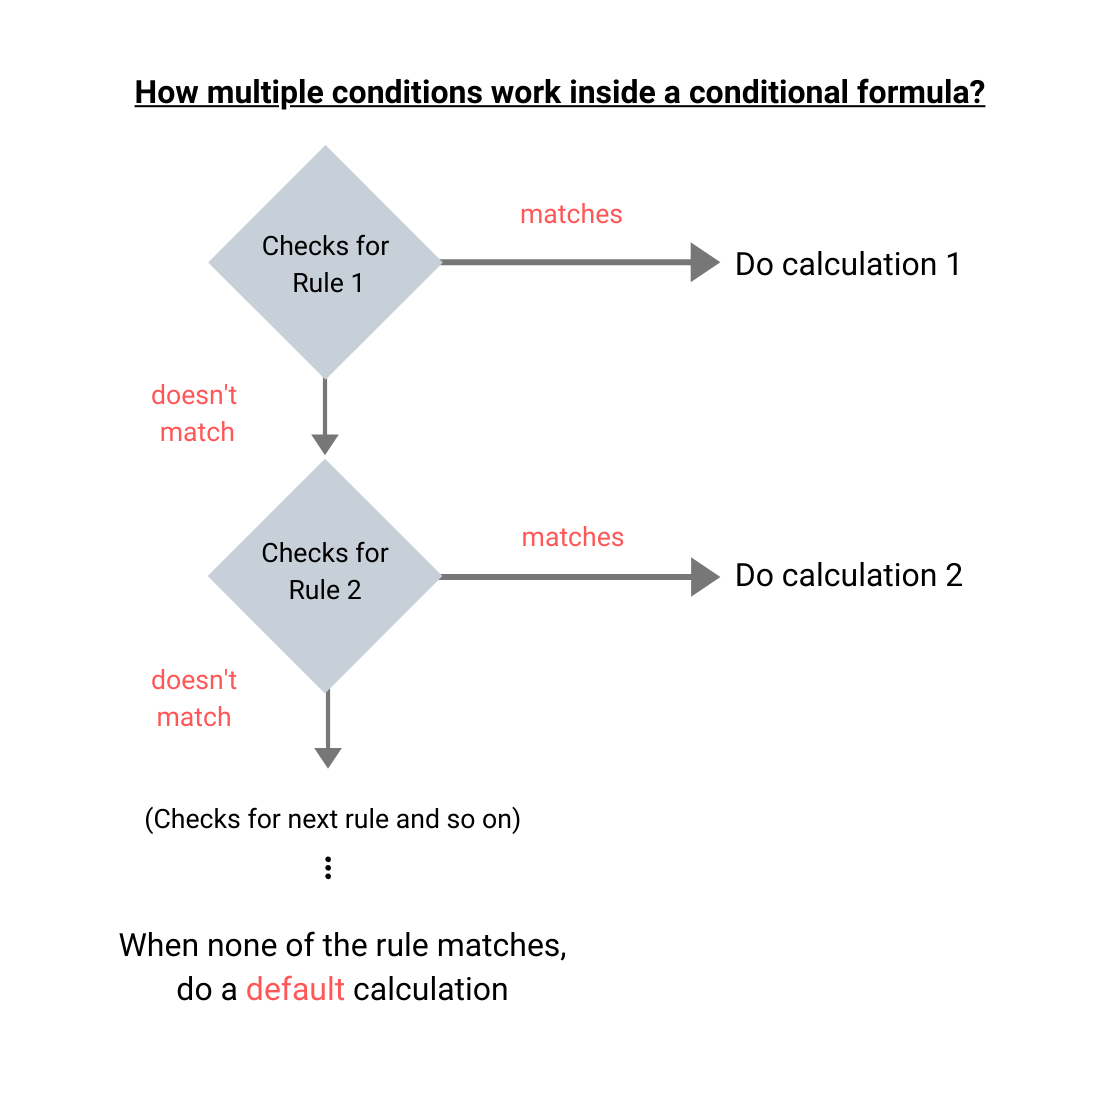 How multiple conditions work inside a conditional formula